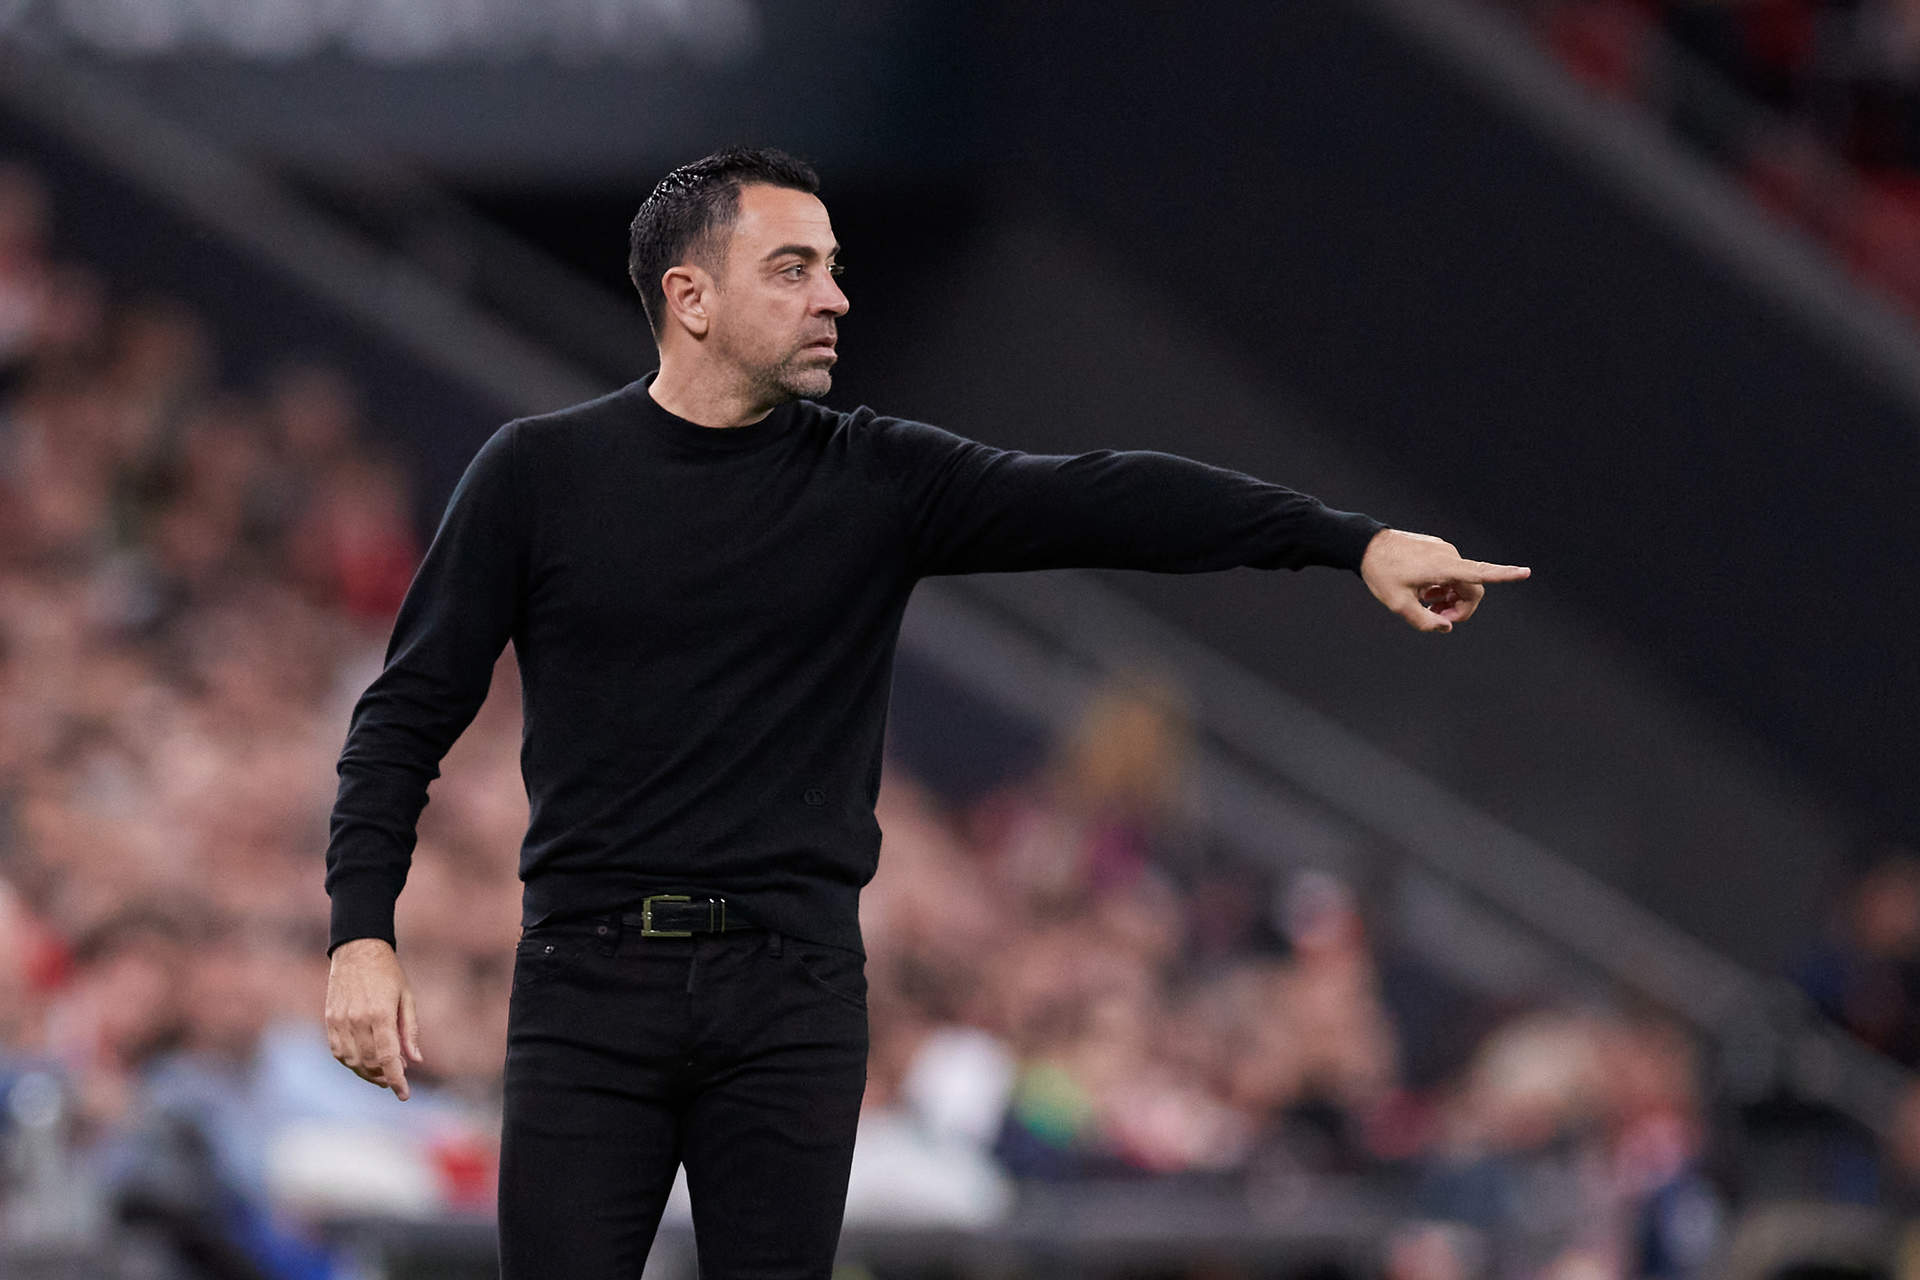 Xavi Hernandez head coach of FC Barcelona reacts during the LaLiga Santander match between Athletic Club and FC Barcelona at San Mames  on March 12, 2023, in Bilbao, Spain.